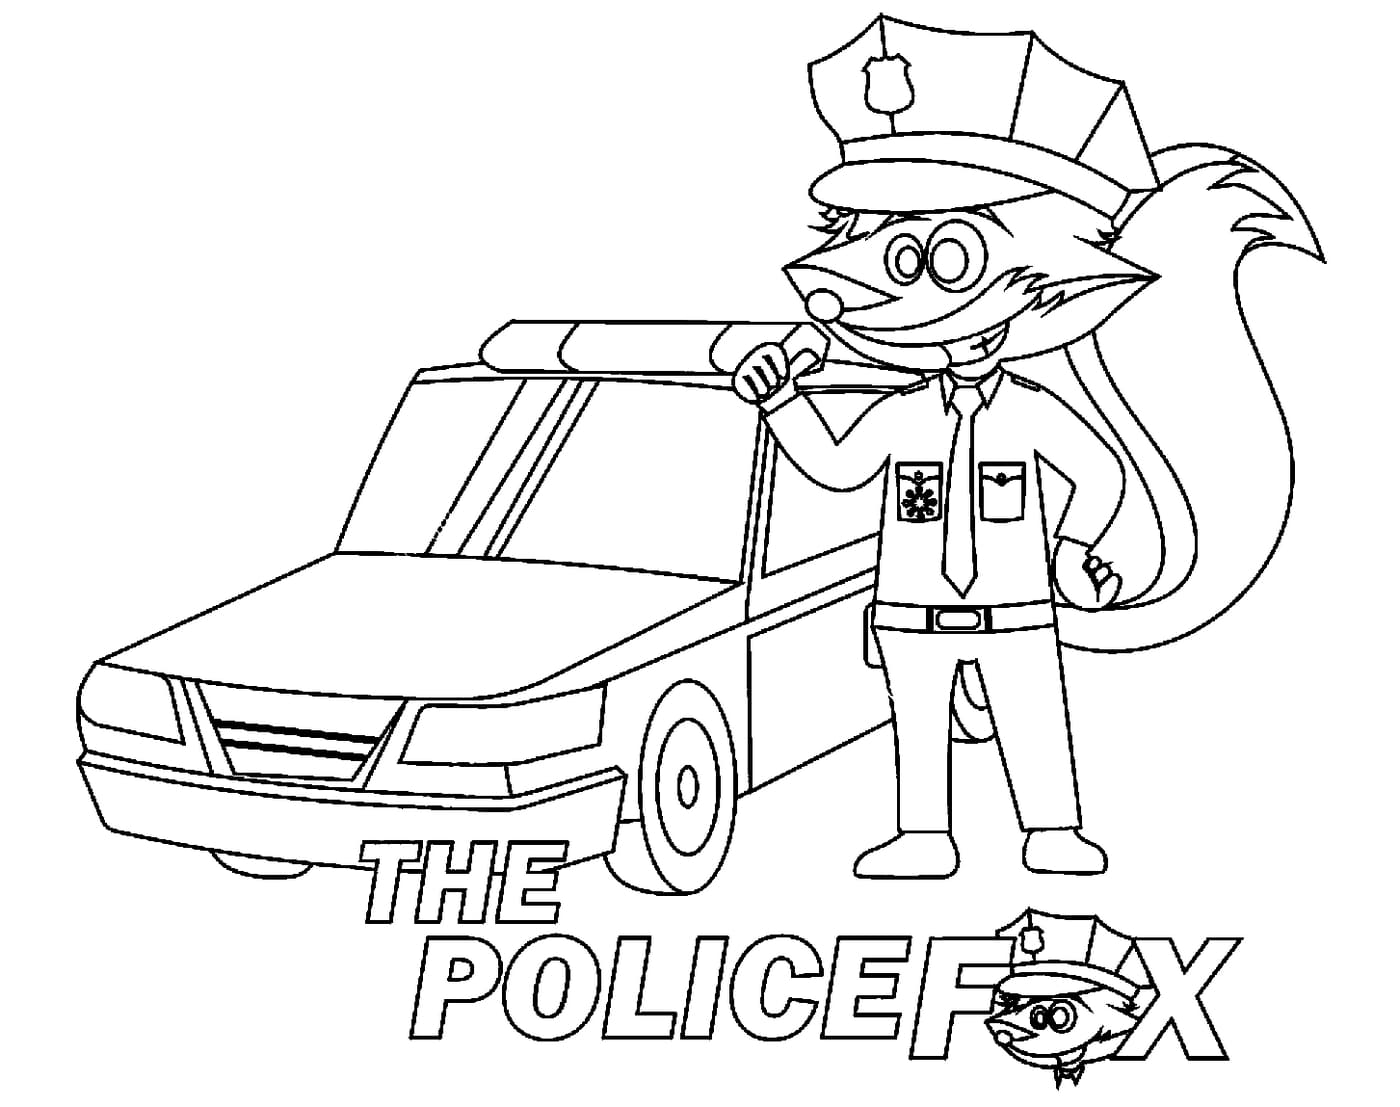 police safety coloring pages